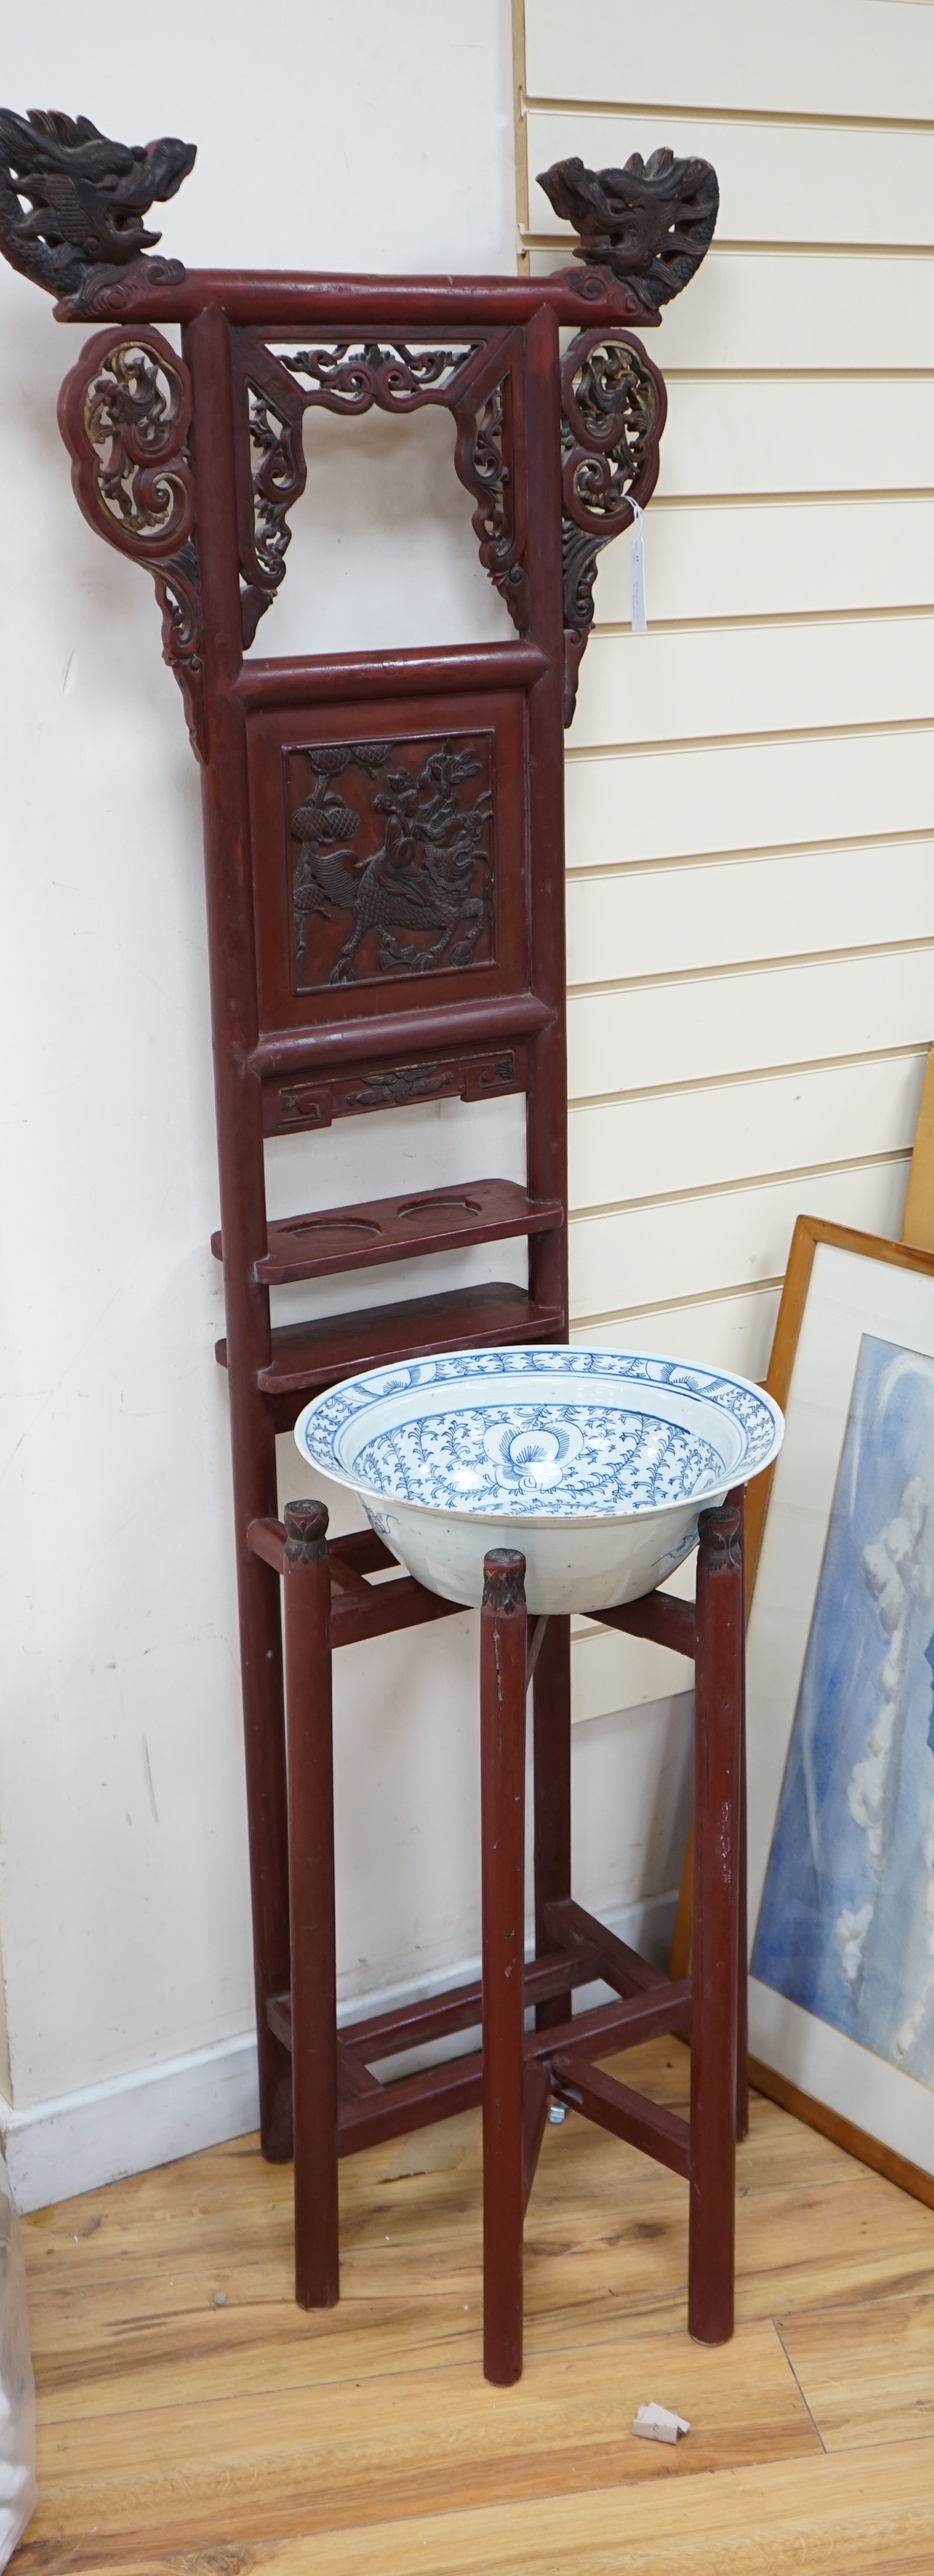 A 19th century Chinese lacquered wood washstand with sweet pea blue and white basin - 168cm high